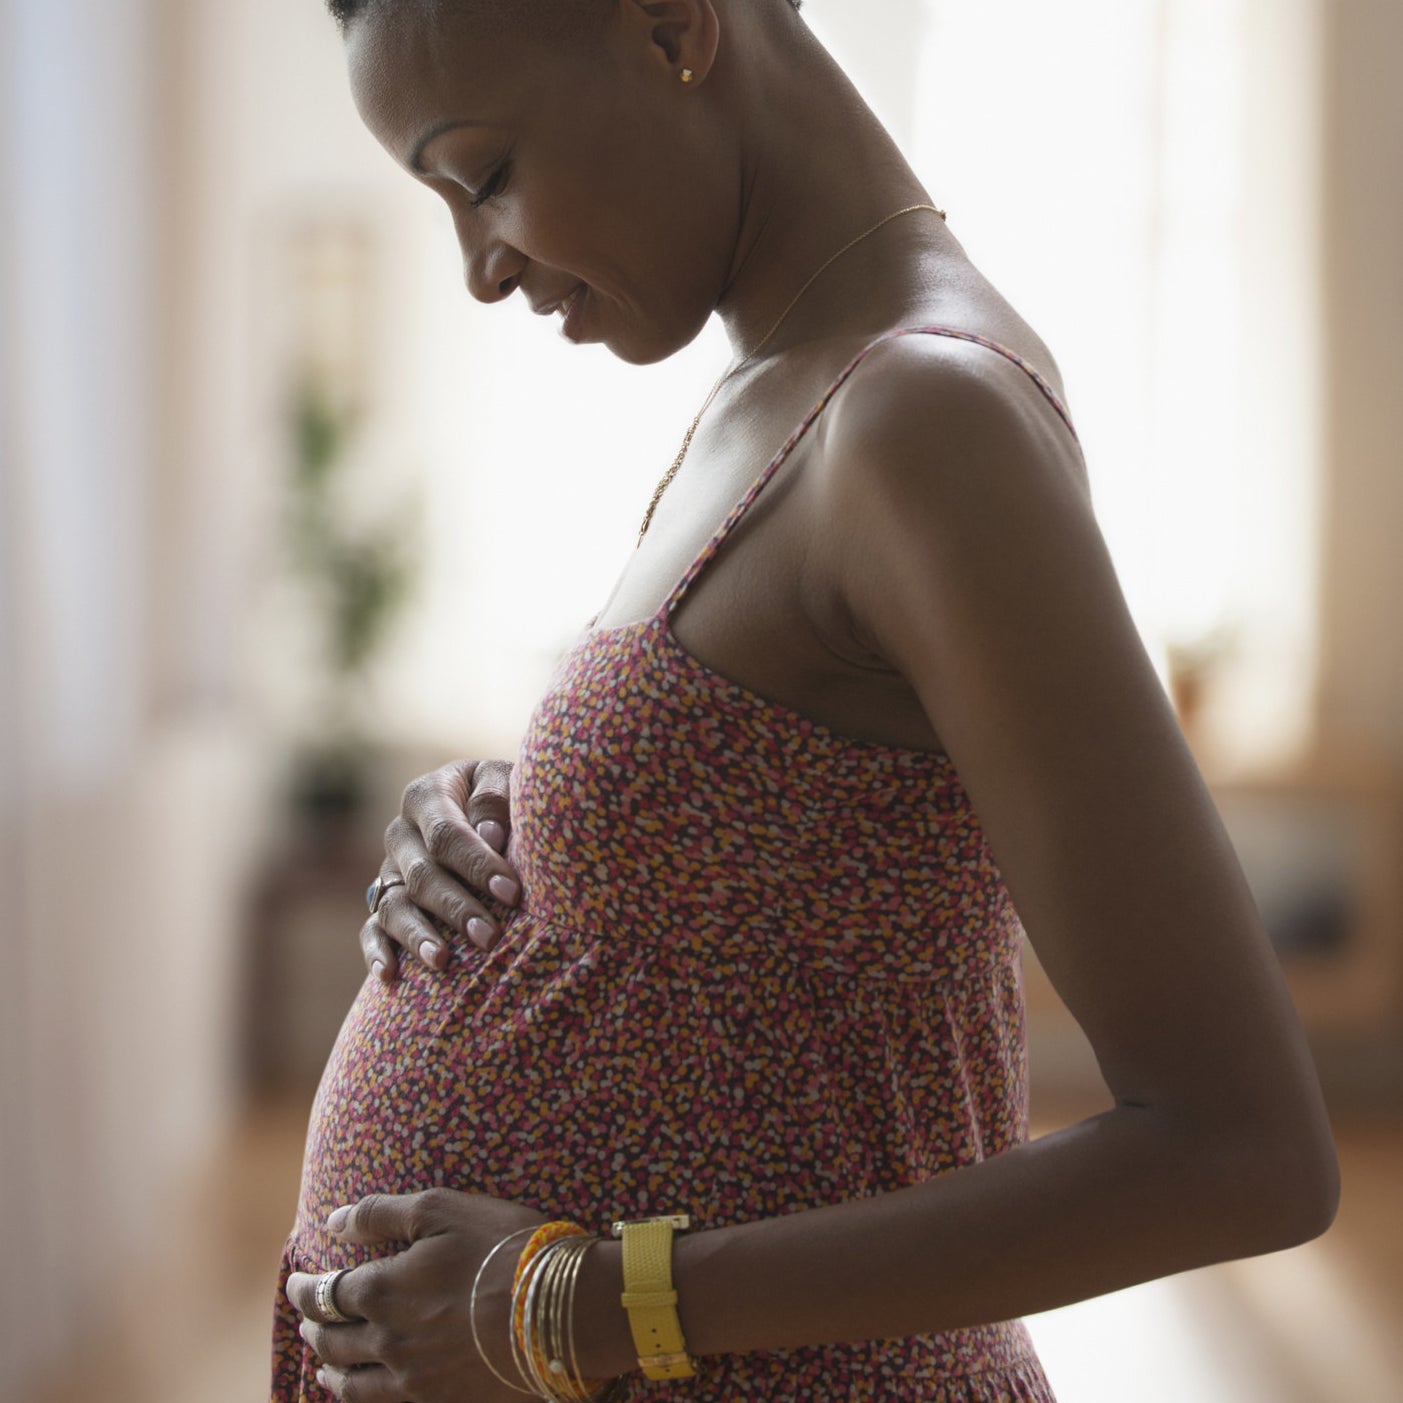 A woman holding her pregnant belly.